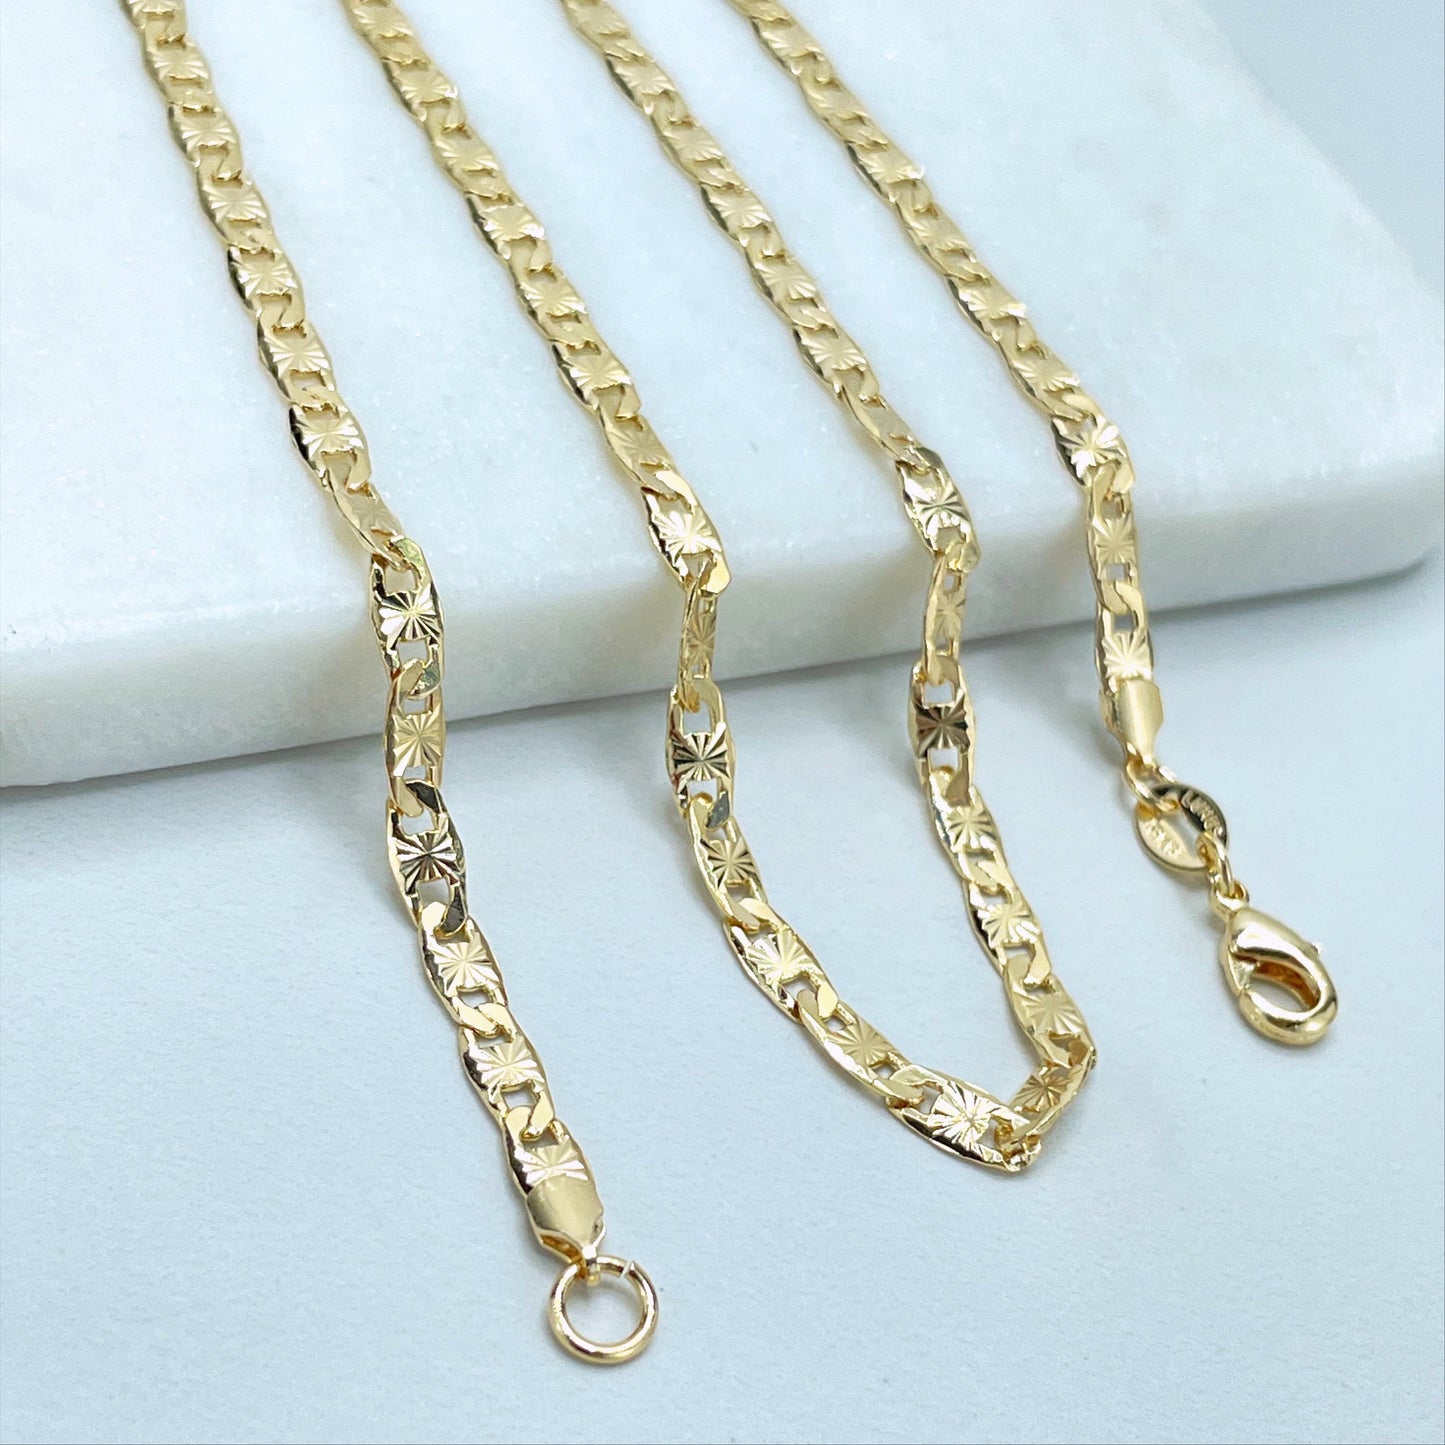 18k  Gold Filled or Silver Gold Filled 3.7mm Thickness Mariner Anchor Link Chain Necklaces for Wholesale Jewelry Making Supplies